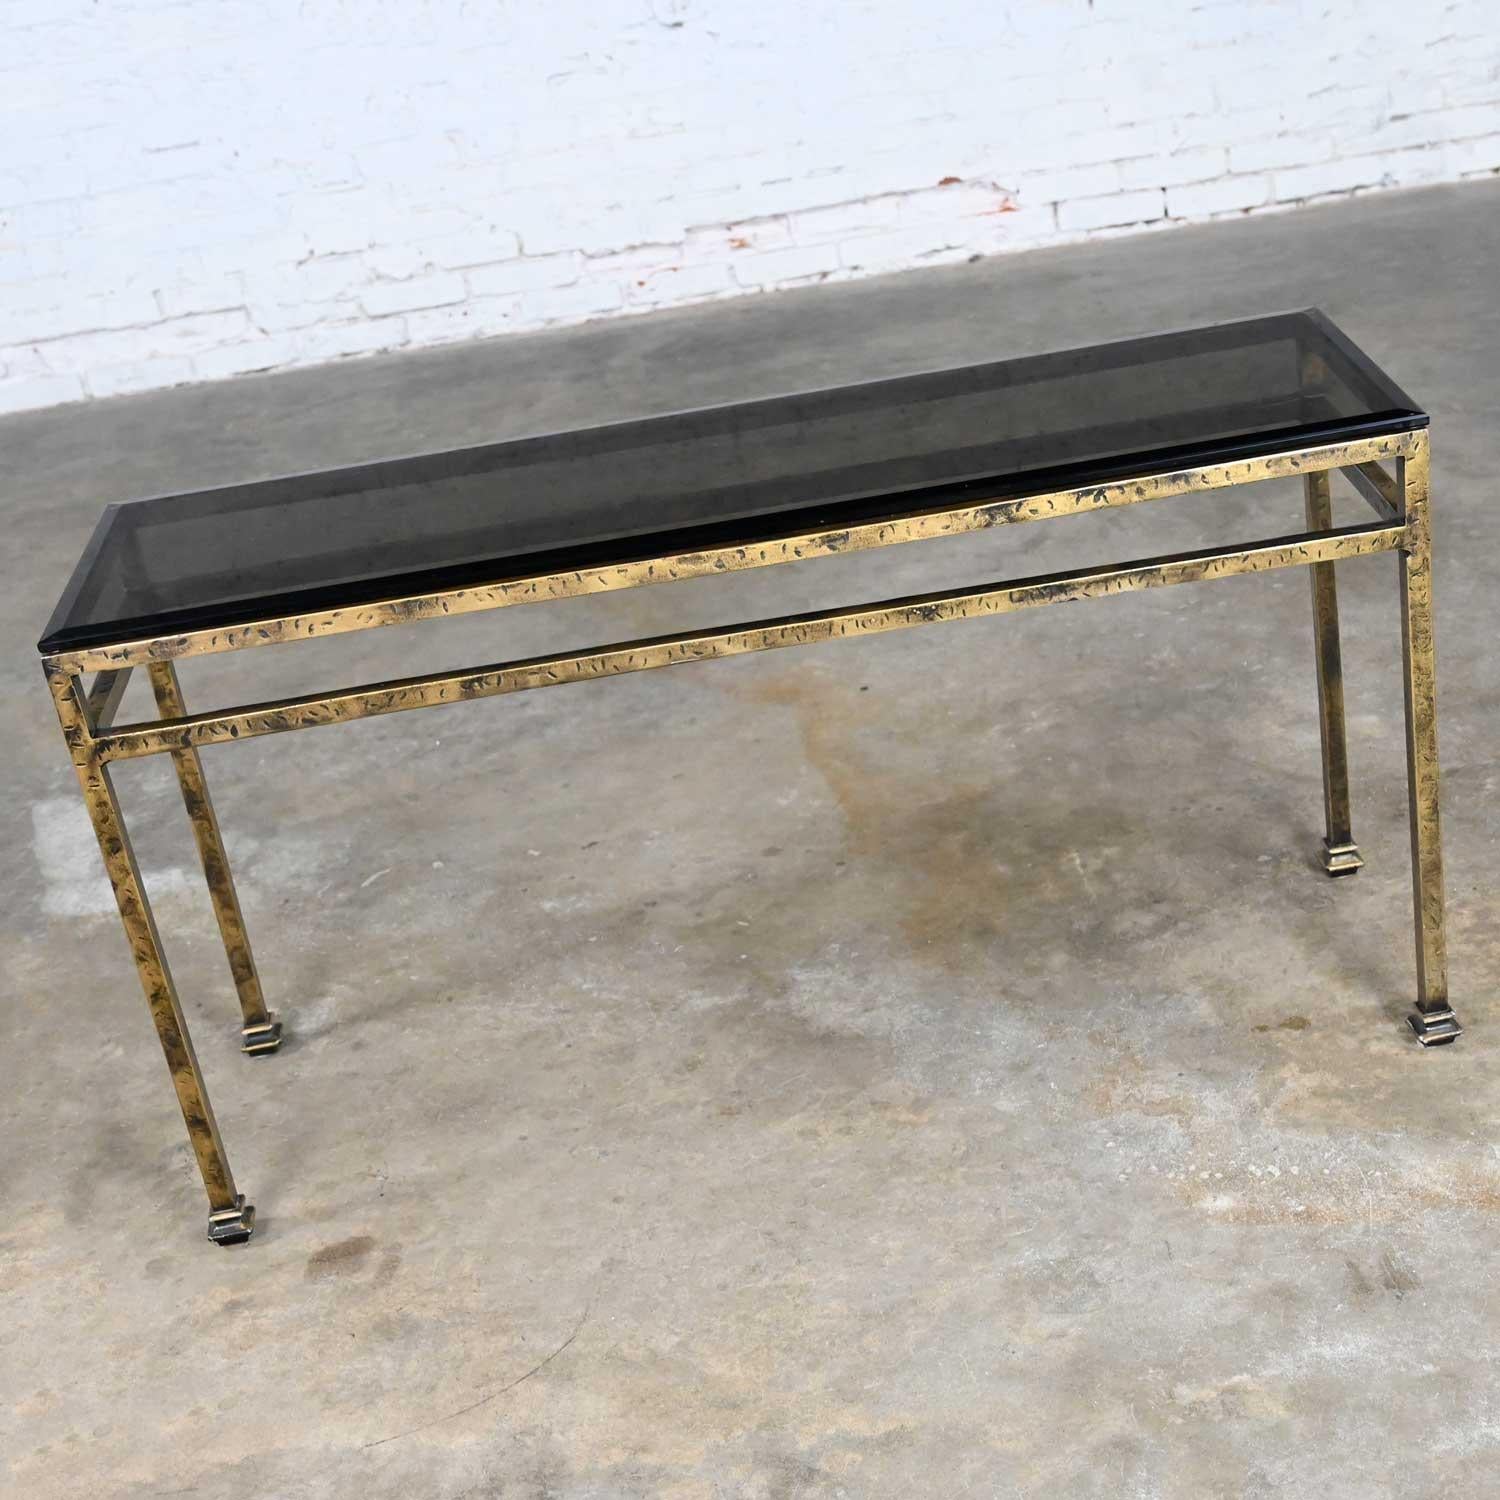 Wonderful modern iron console table with a gold hammered-look and smoked & beveled edge glass top. Beautiful condition, keeping in mind that this is vintage and not new so will have signs of use and wear. Please see photos and zoom in for details.